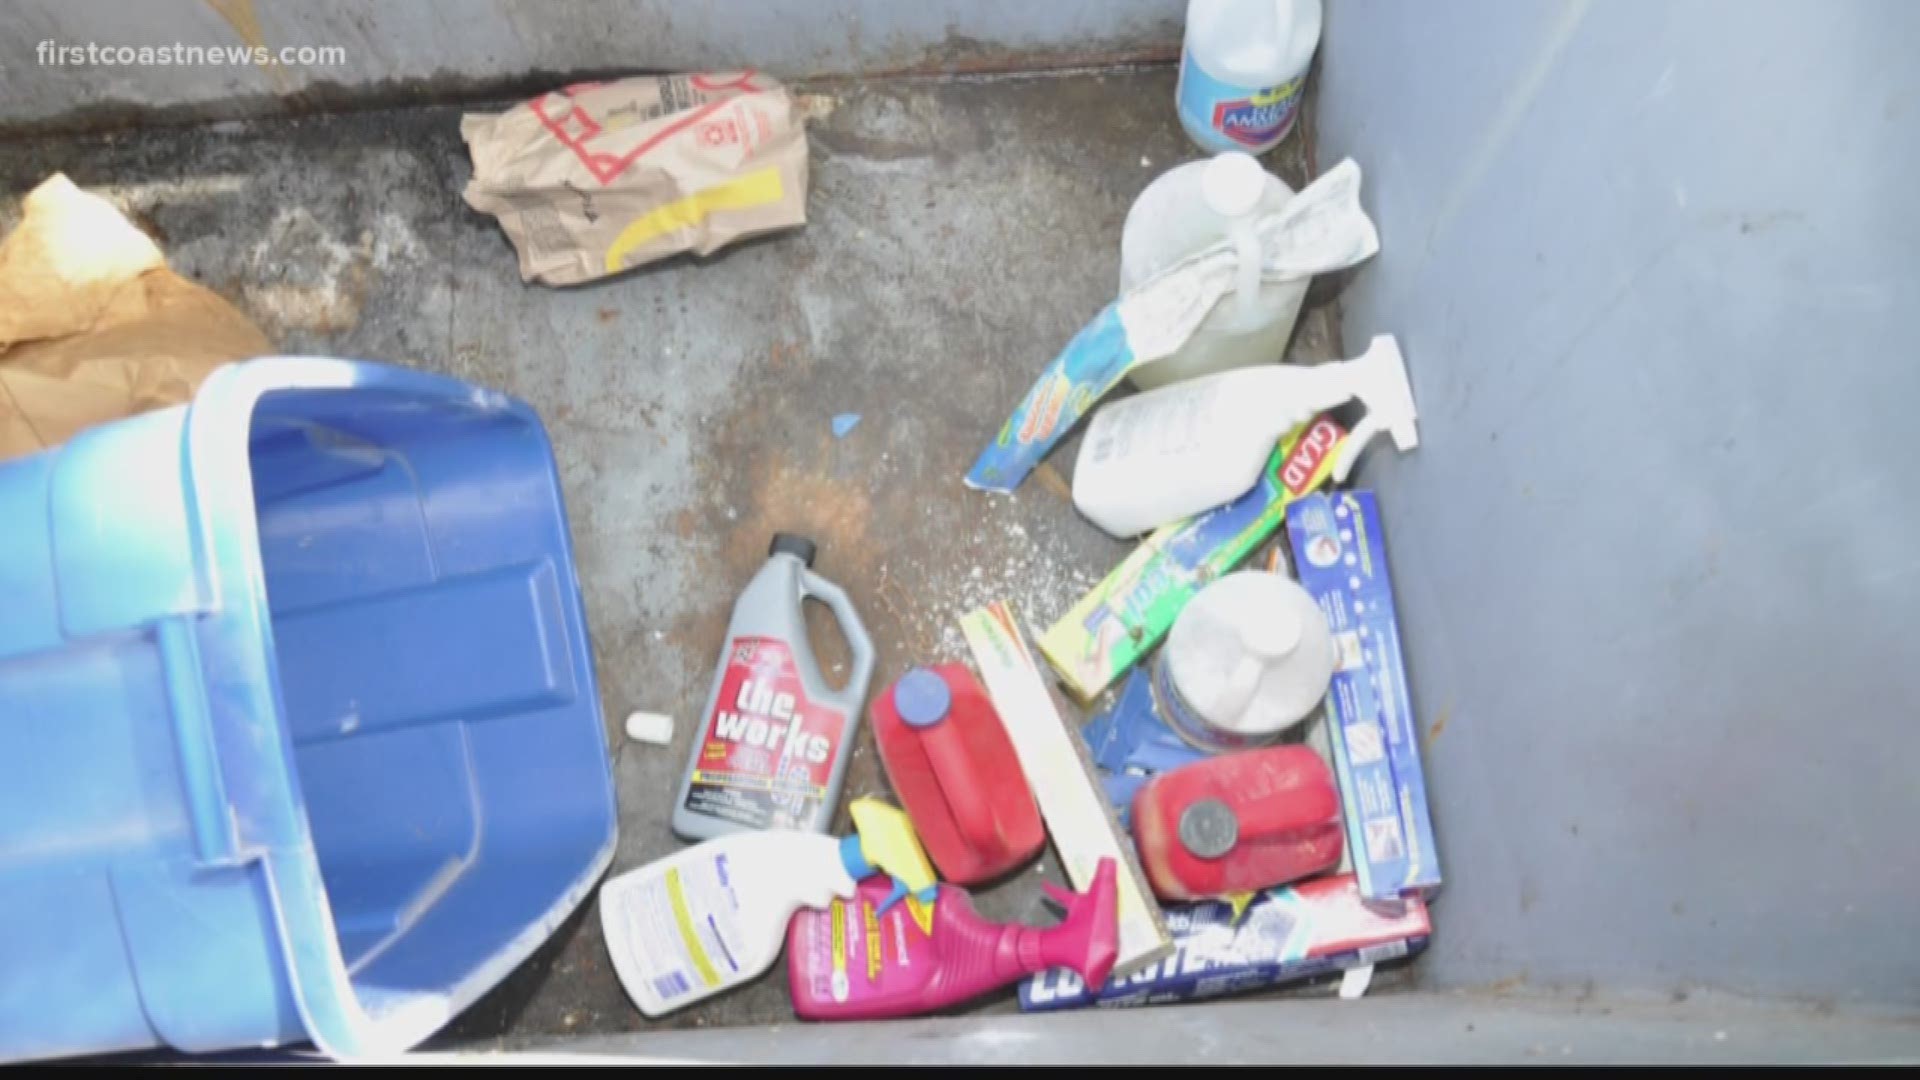 The newly released materials include photos such as a dumpster full of cleaning products and wax paper. Another photo shows a blue tarp and gray bin which have stains of some type on them.